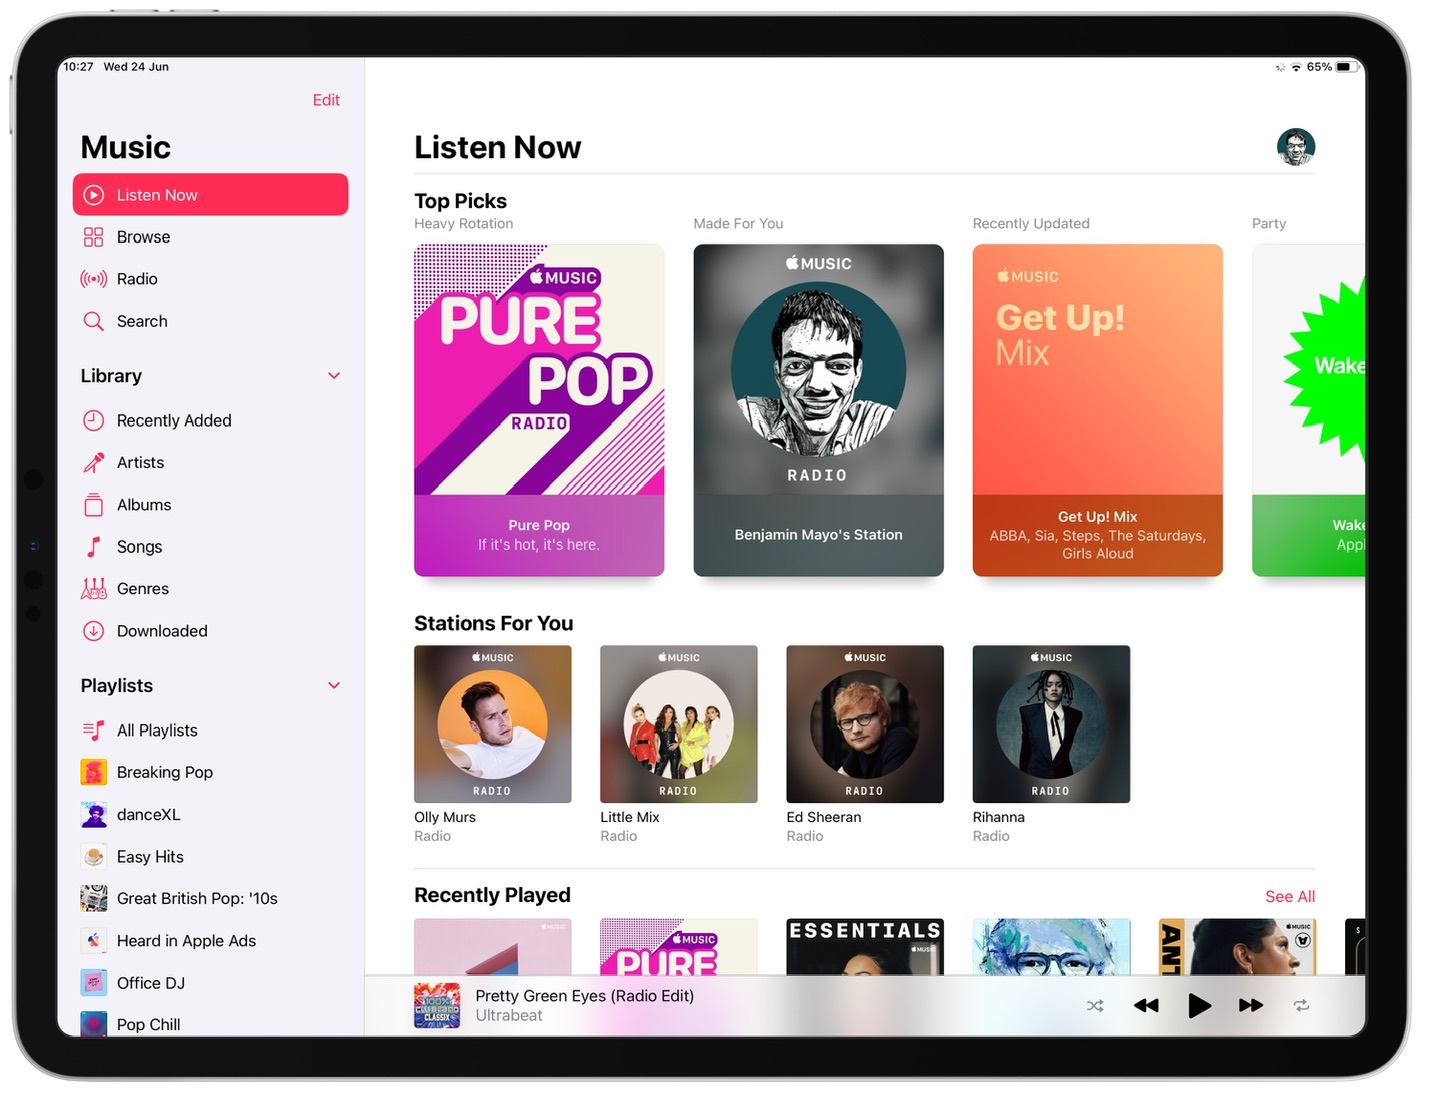 What S New In The Apple Music App For Ios 14 Listen Now Tab